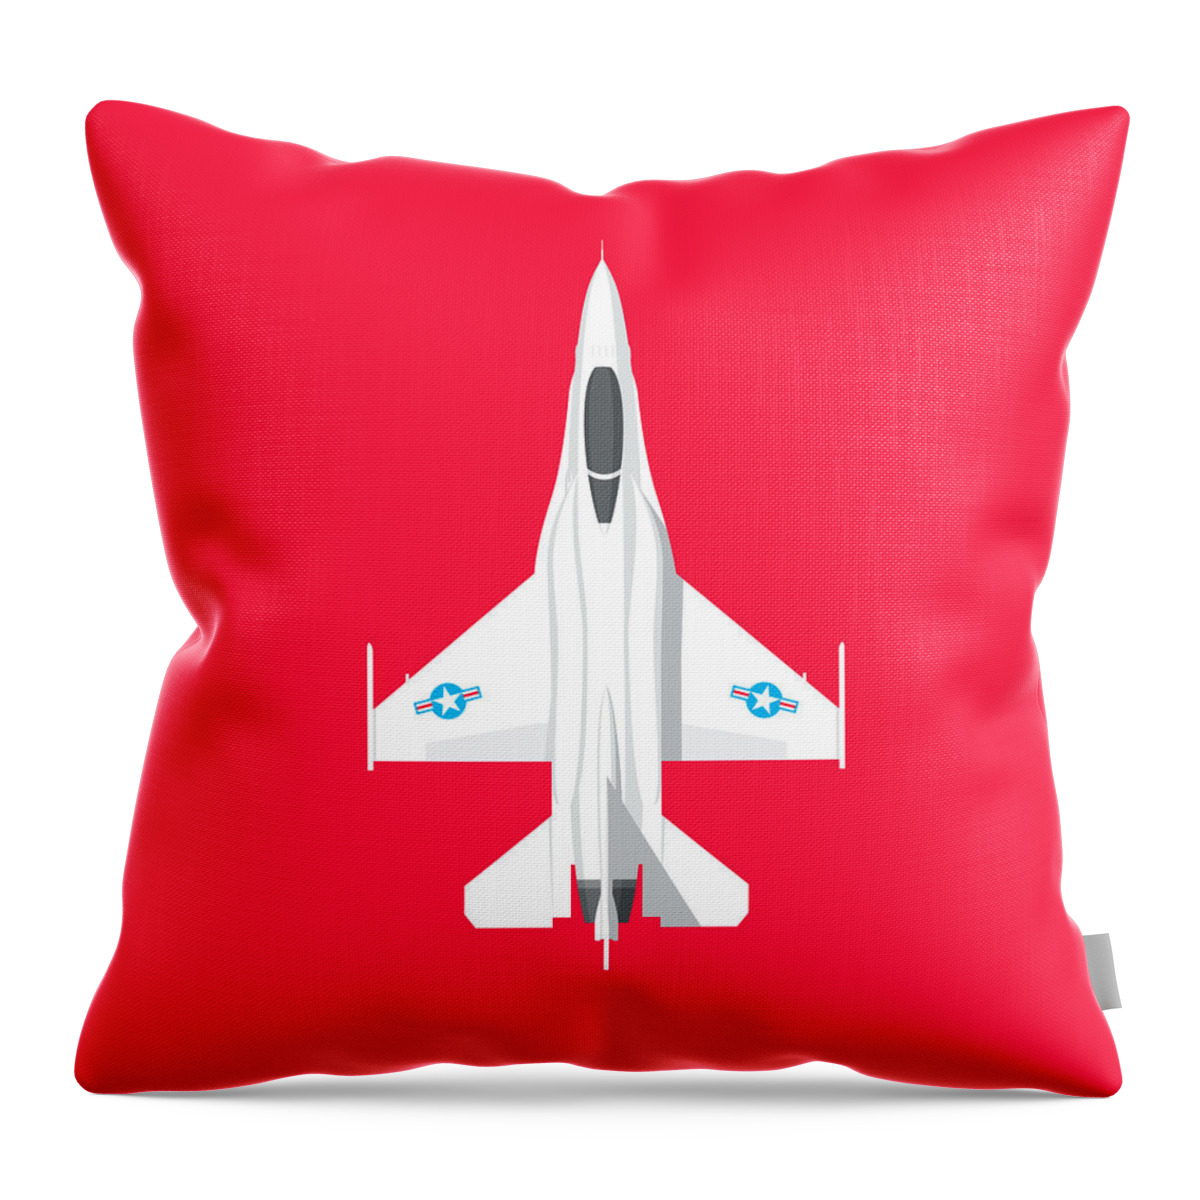 Fighter Throw Pillow featuring the digital art F-16 Viper Fighter Jet Aircraft - Crimson by Organic Synthesis